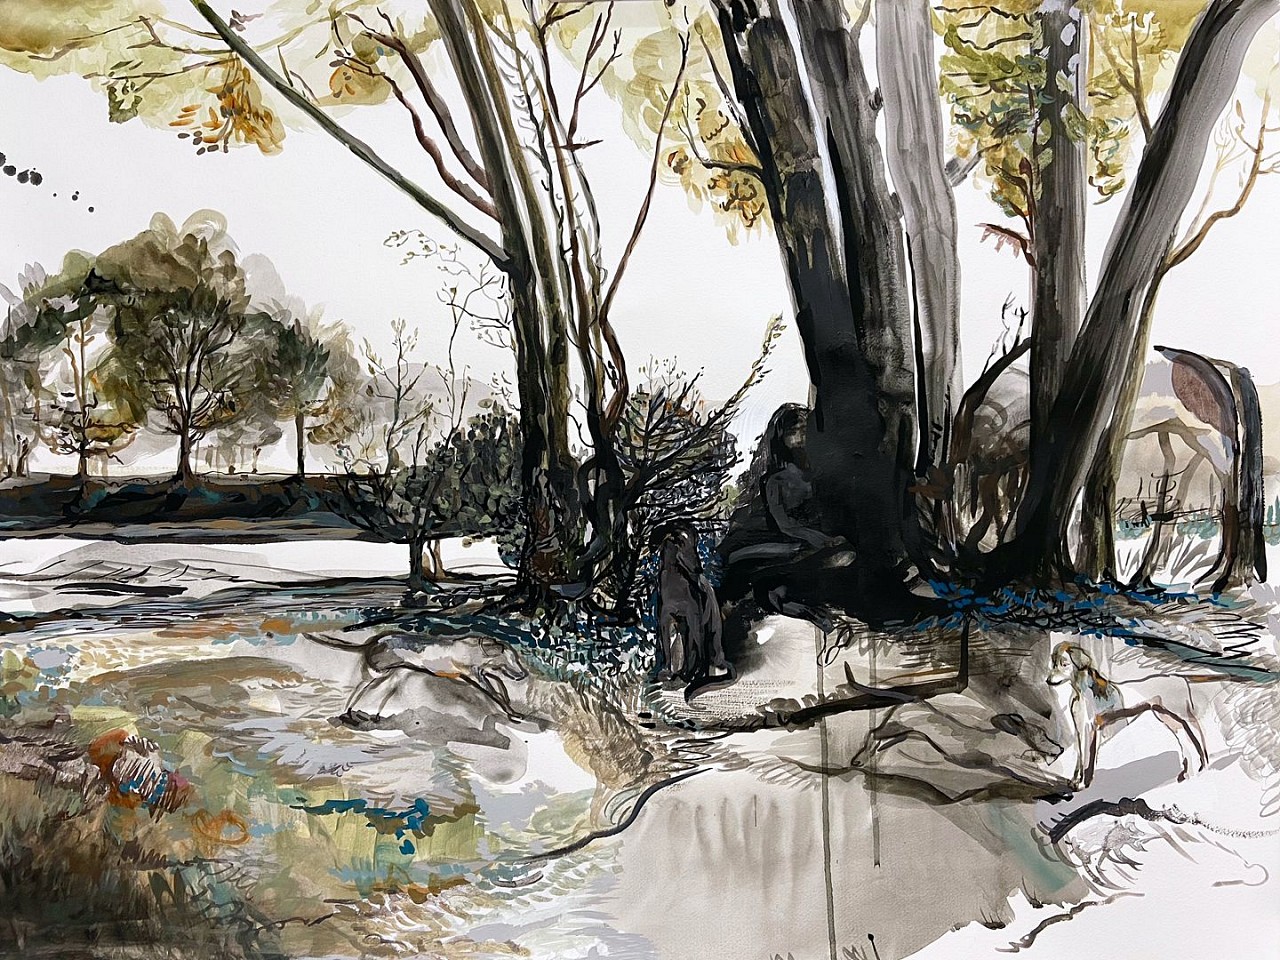 Suzy Spence
Fading Landscape (Lover in the Tree), 2022
SPENC324
flashe and acrylic on paper, 22 x 30 inches